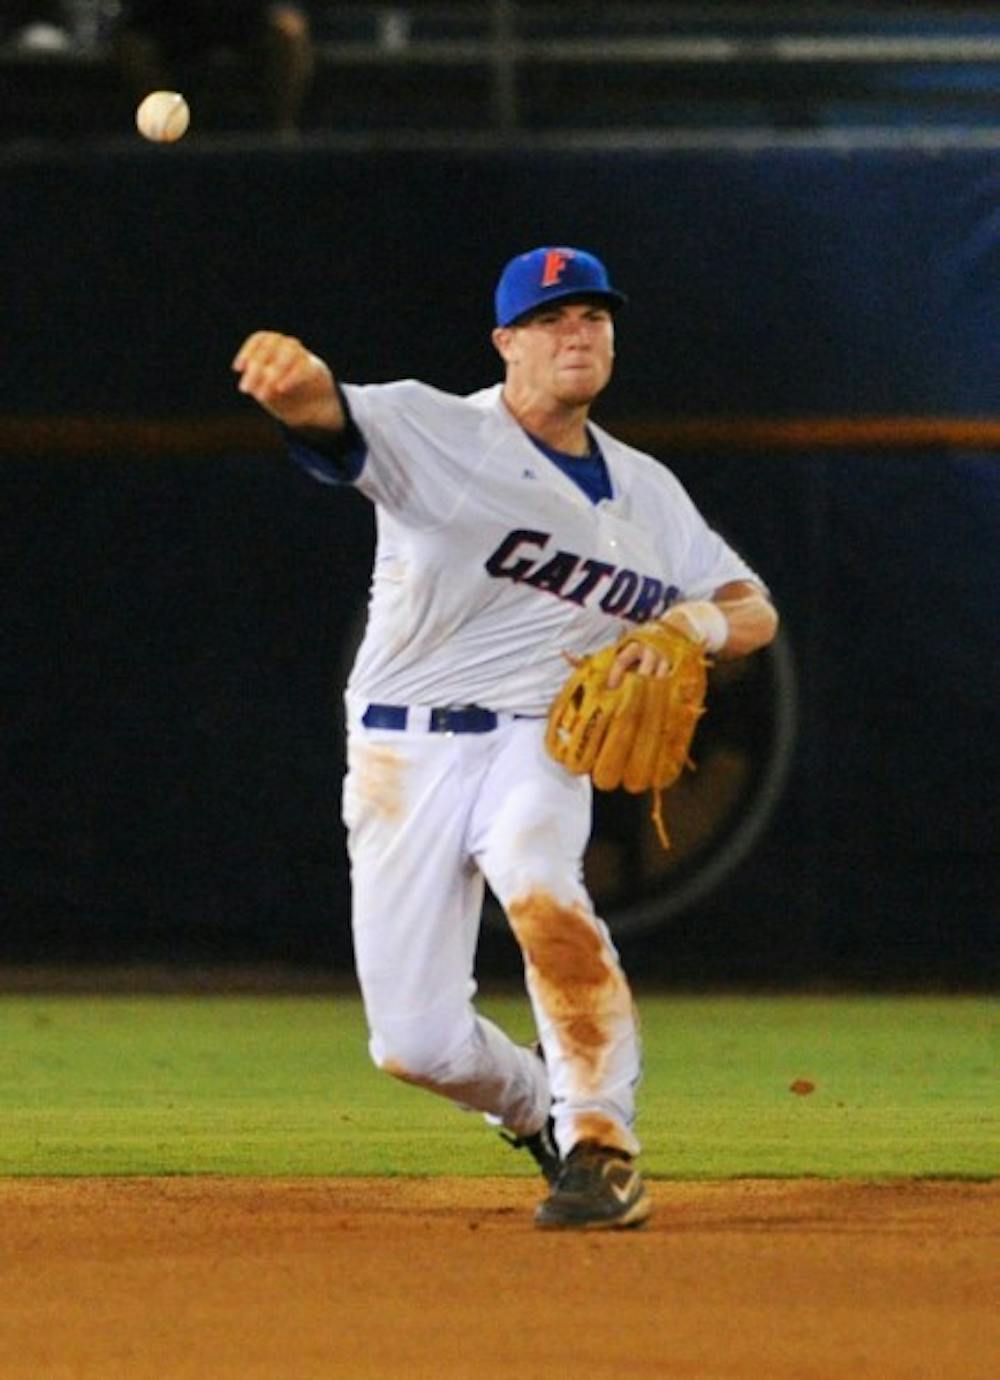 <p>Florida junior shortstop Nolan Fontana said he is working to be a mentor for younger players like freshman Casey Turgeon as the Gators search for a new second baseman.&nbsp;</p>